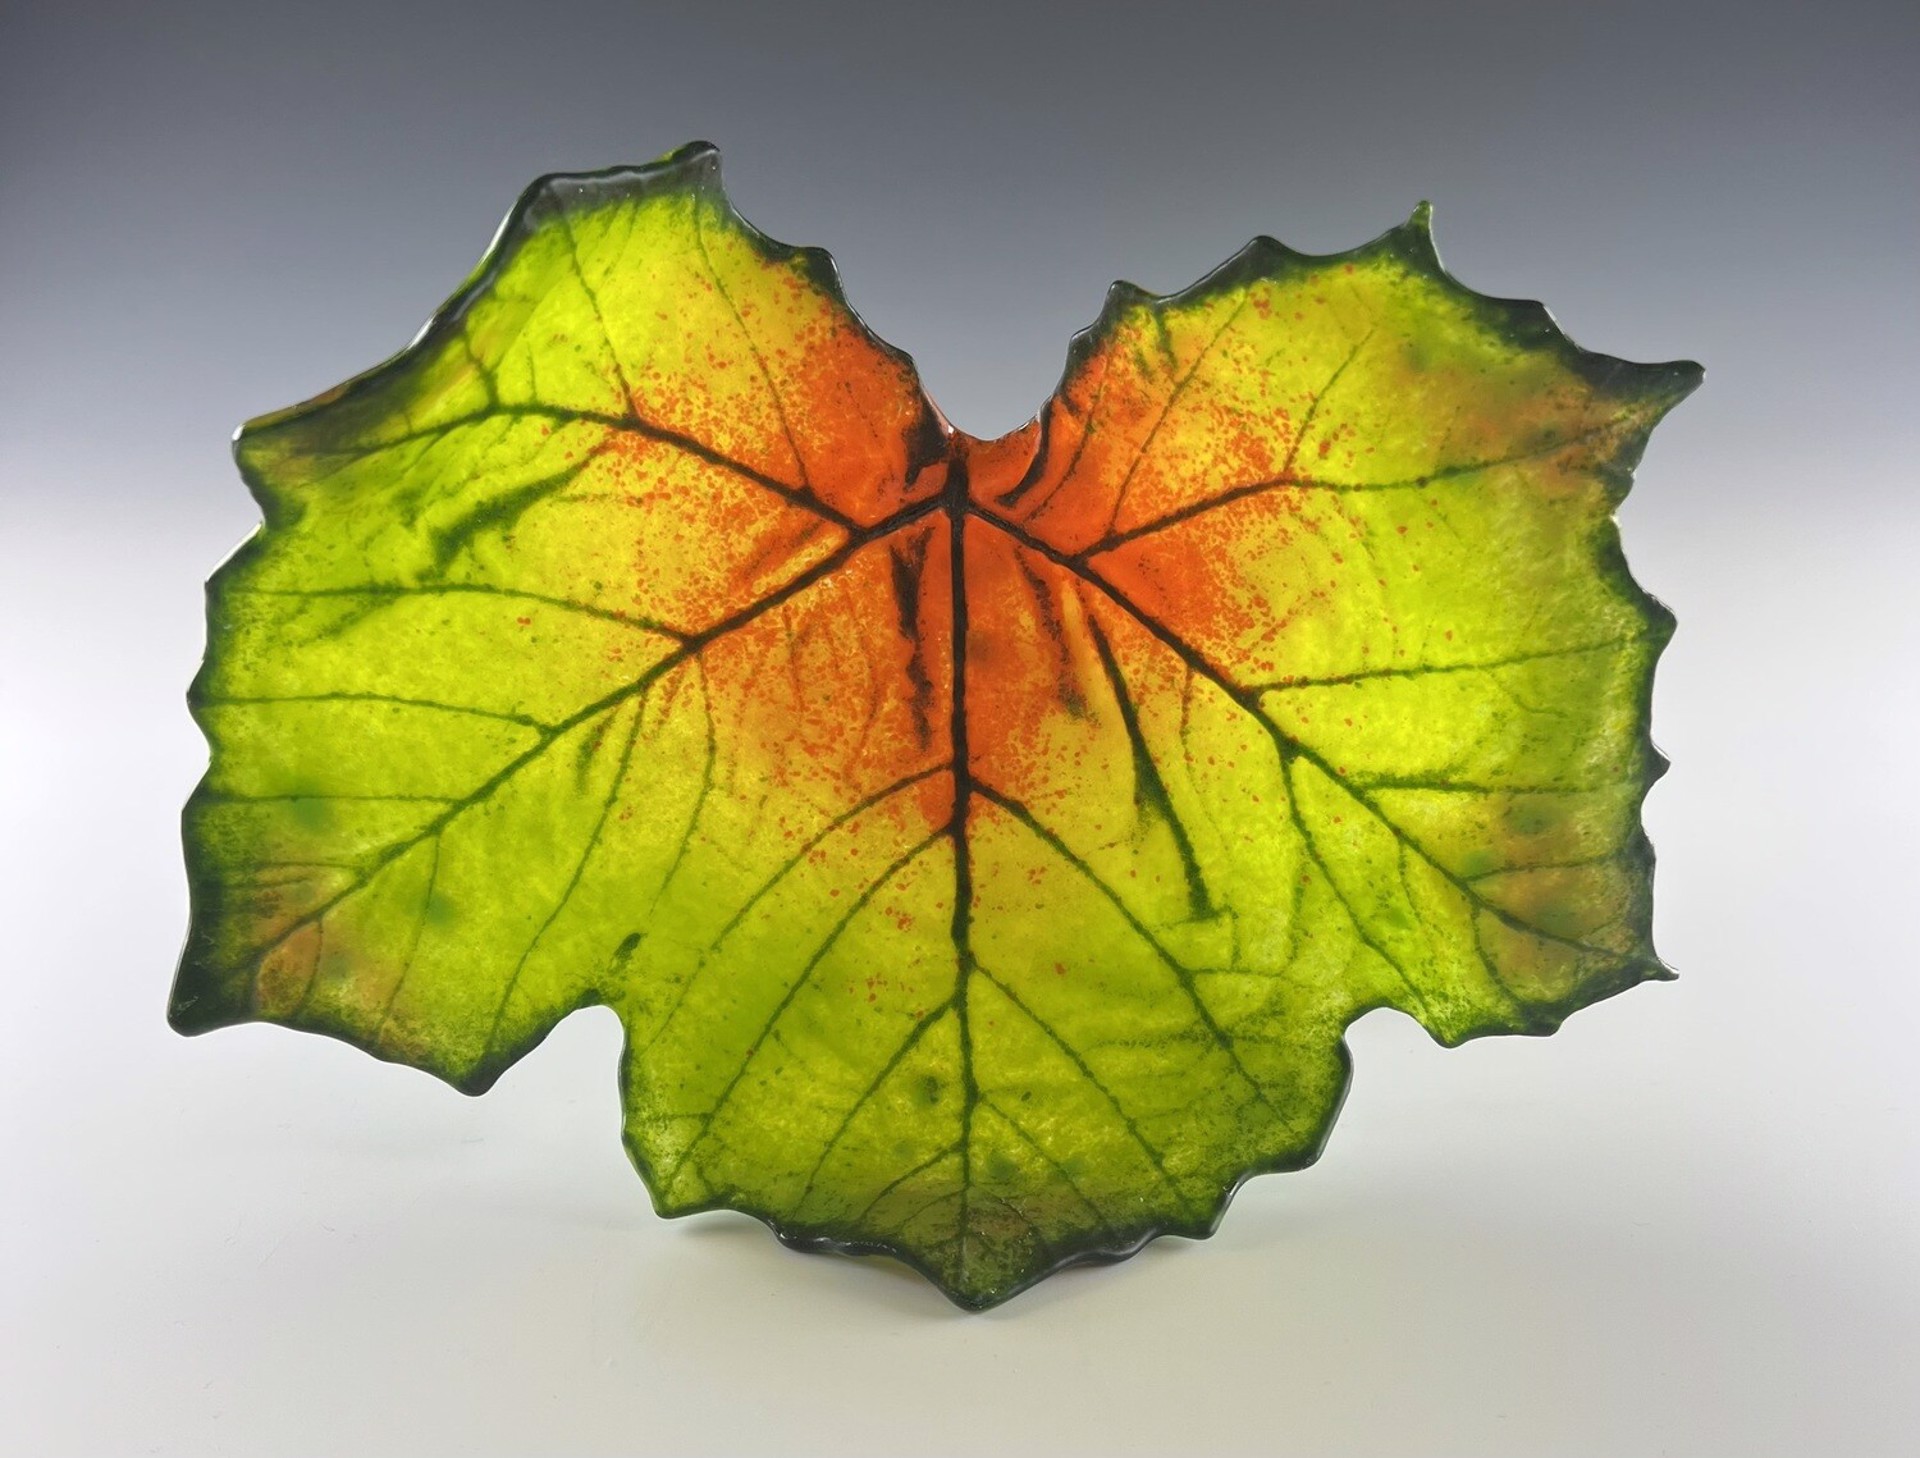 Sycamore Leaf - Green, Yellow, Tangerine by Deb Williams